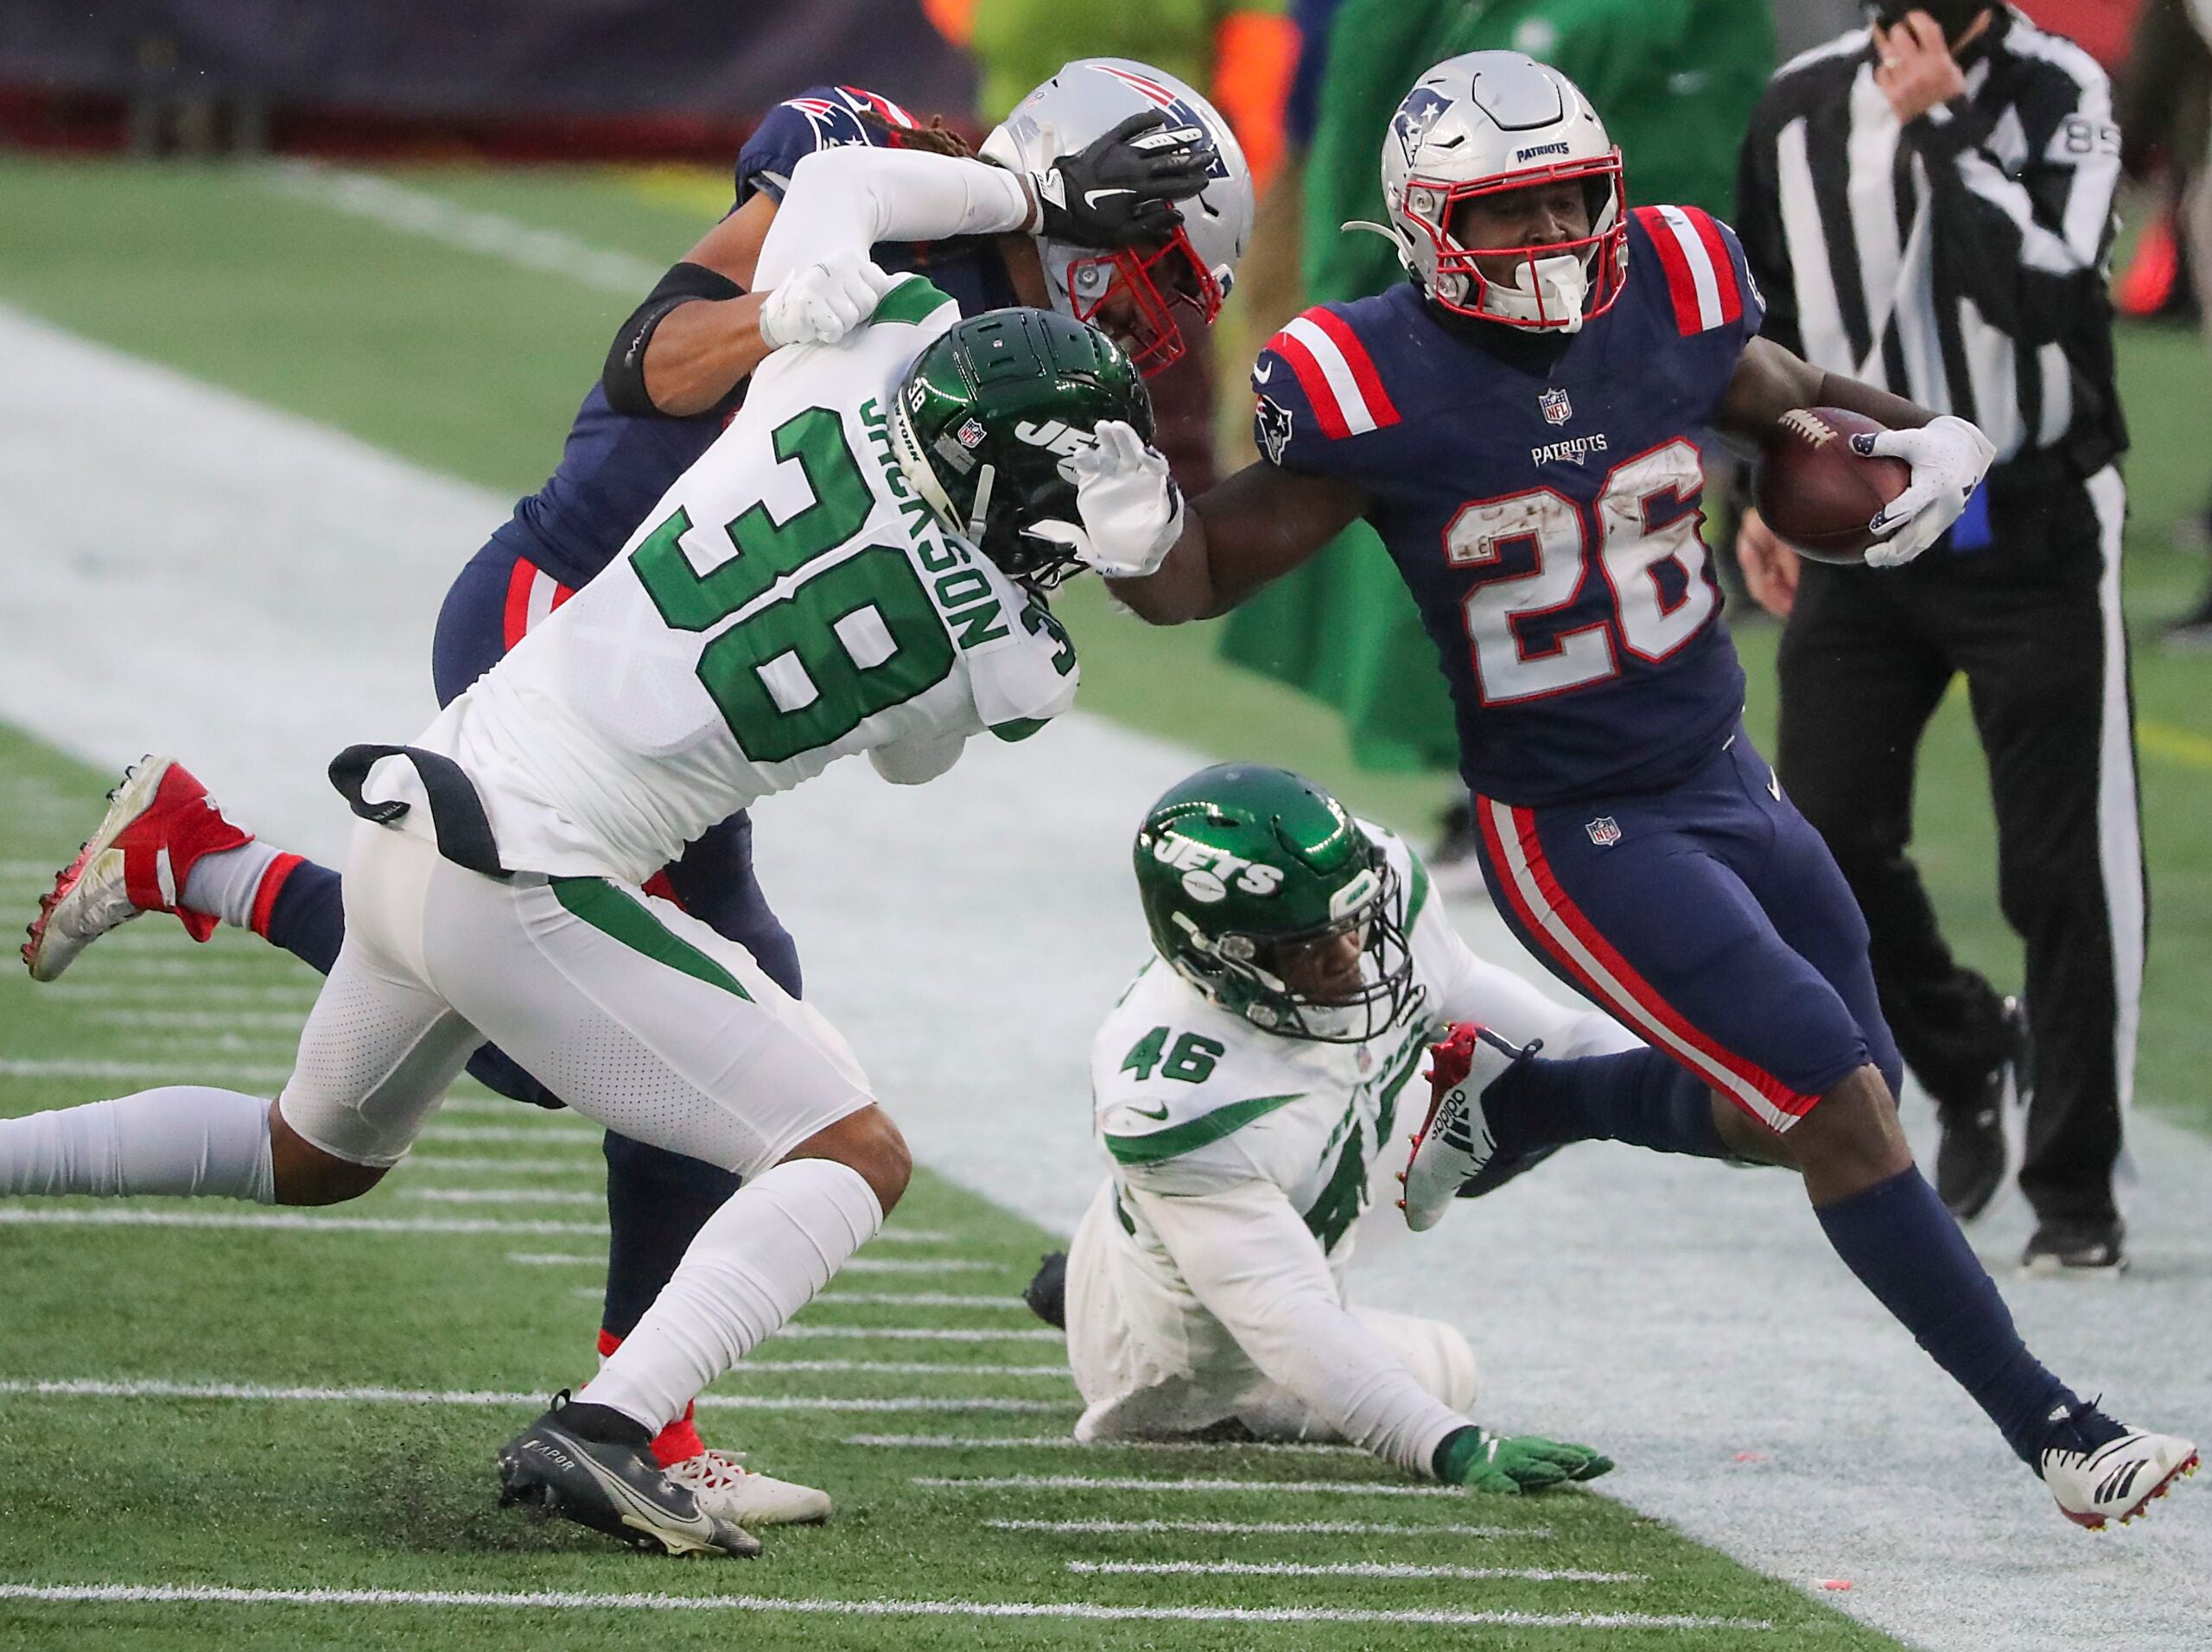 Patriots vs Jets final score: New England ends season with 28-14